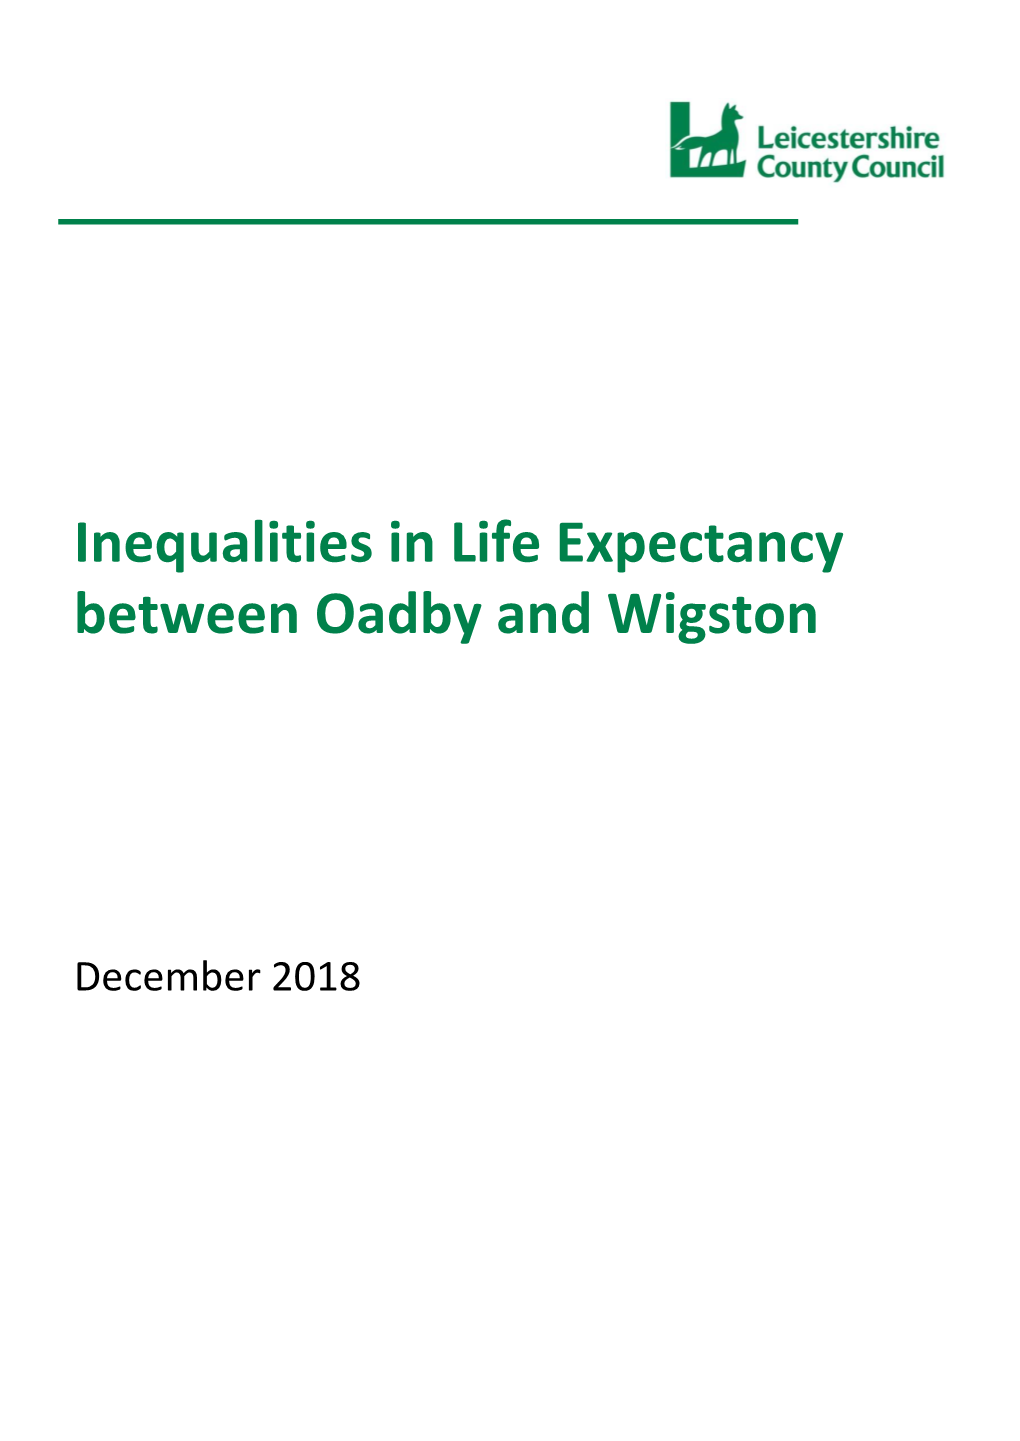 Inequalities in Life Expectancy Between Oadby and Wigston (2018)